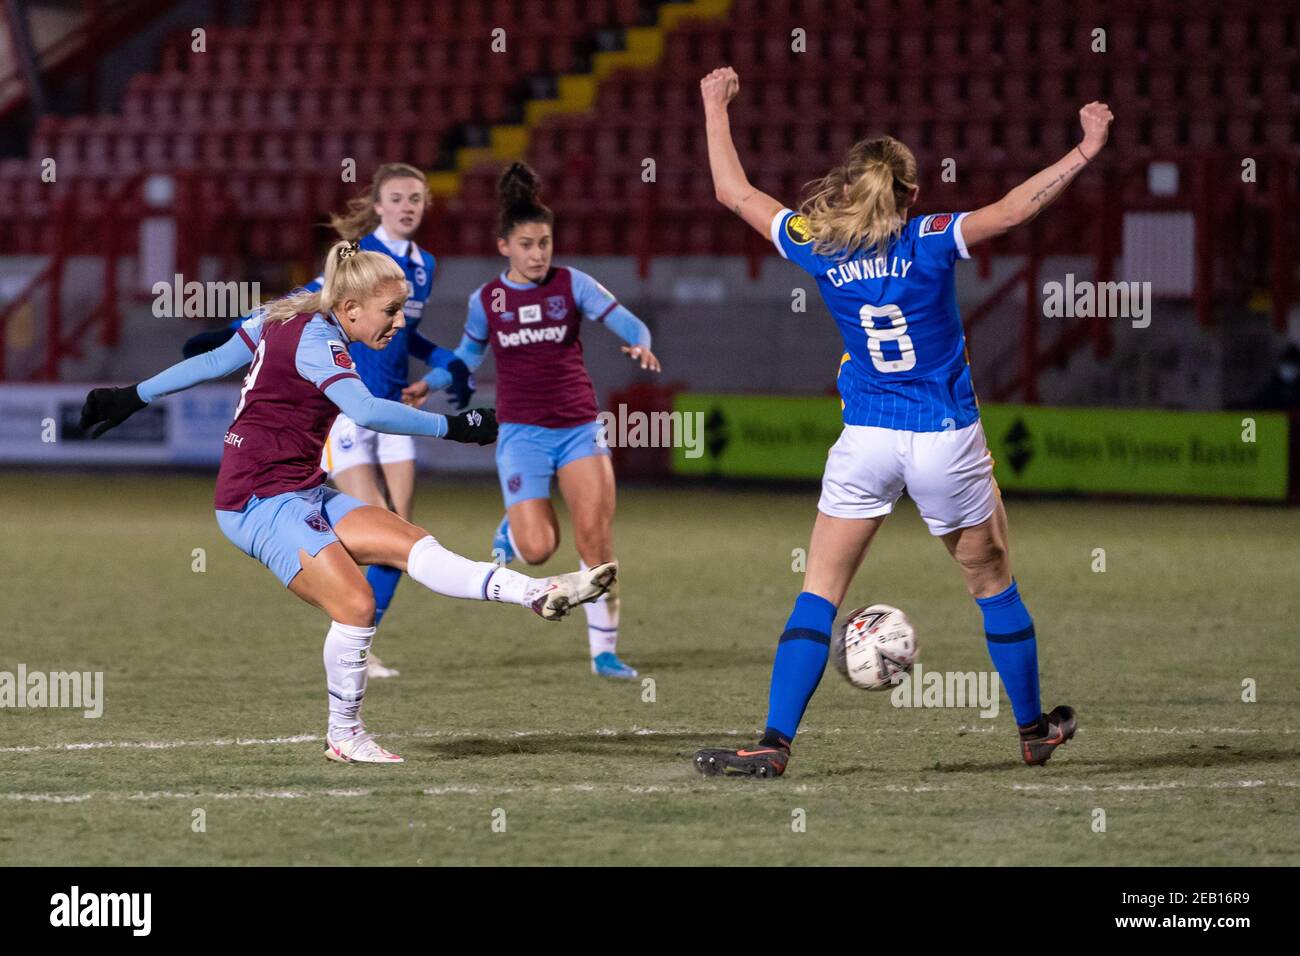 Crawley, UK. 10th Feb, 2021. Adriana Leon (#19 West Ham United) strikes for goal but is blocked by Megan Connolly (#8 Brighton & Hove Albion) during the Women's Super League match between Brighton and Hove Albion and West Ham United at The People's Pension Stadium in Crawley. Credit: SPP Sport Press Photo. /Alamy Live News Stock Photo